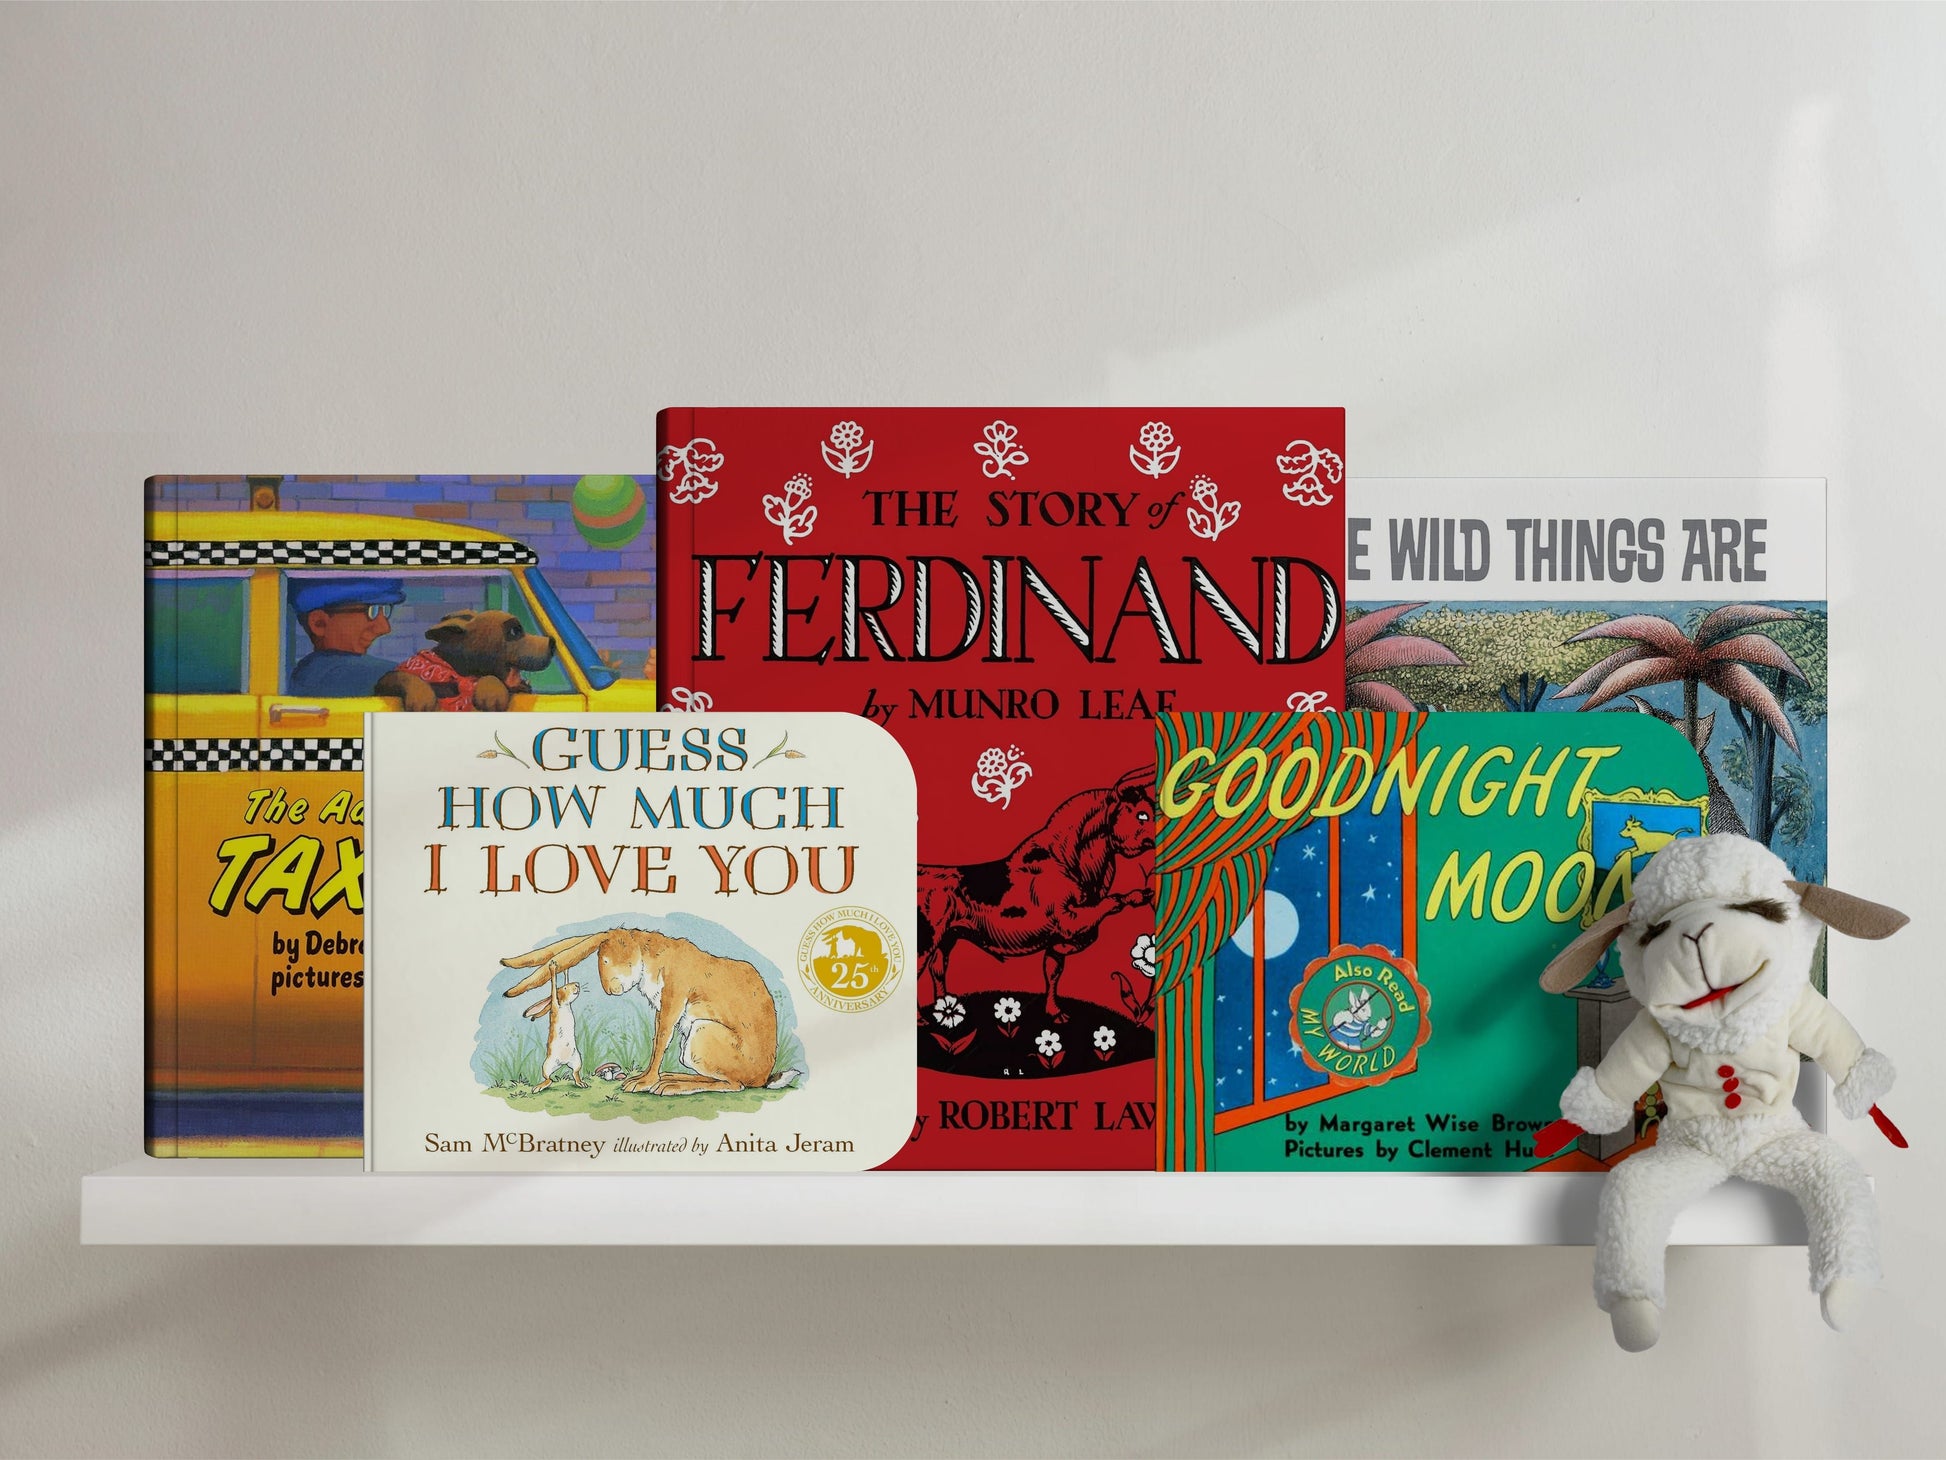 New baby or home book decor ideas featuring Goodnight Moon Jimmy Fallon book Everything is Momma Love you Forever or Guess how much I love you by Sam McBratney featuring Lambchop